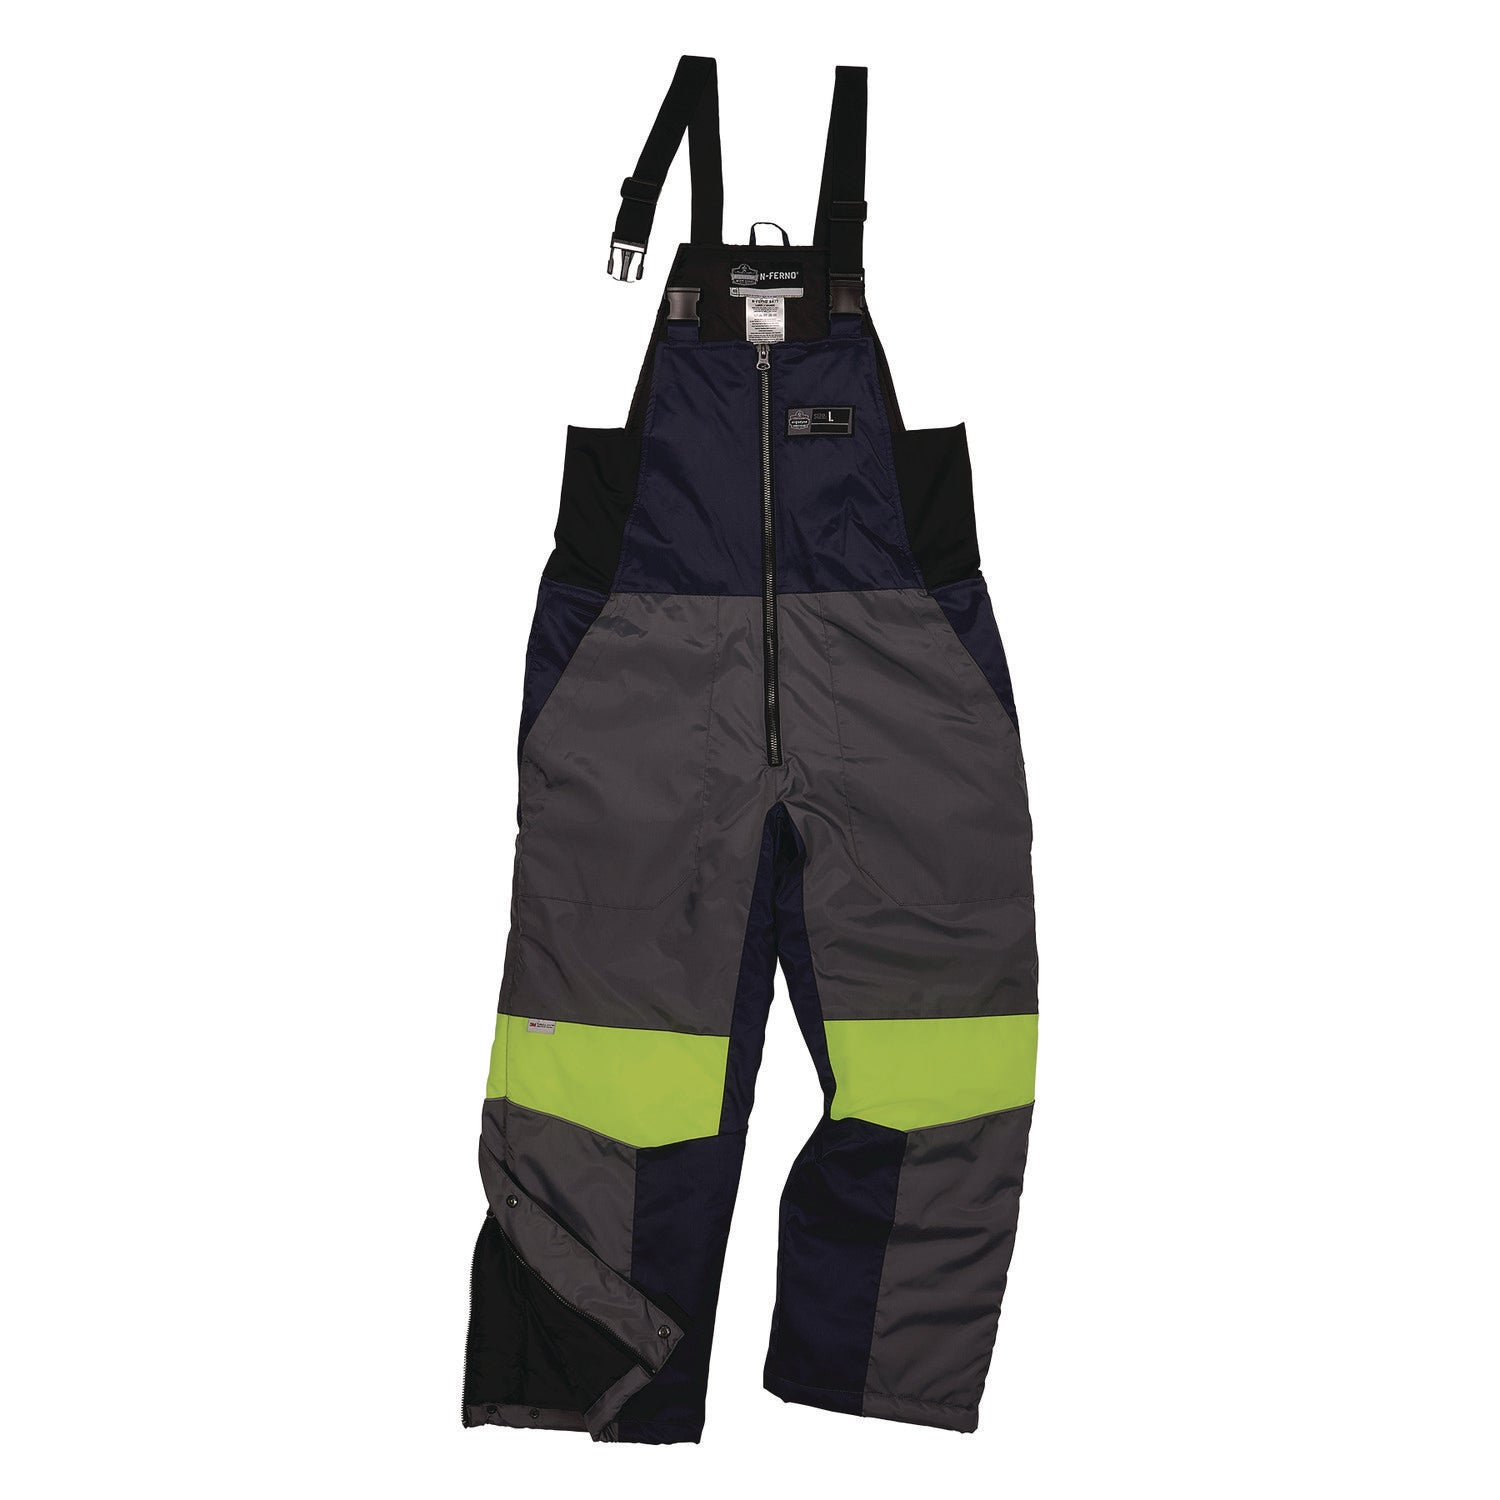 n-ferno-6477-insulated-cooler-bib-overall-5x-large-navy-ships-in-1-3-business-days_ego41269 - 1